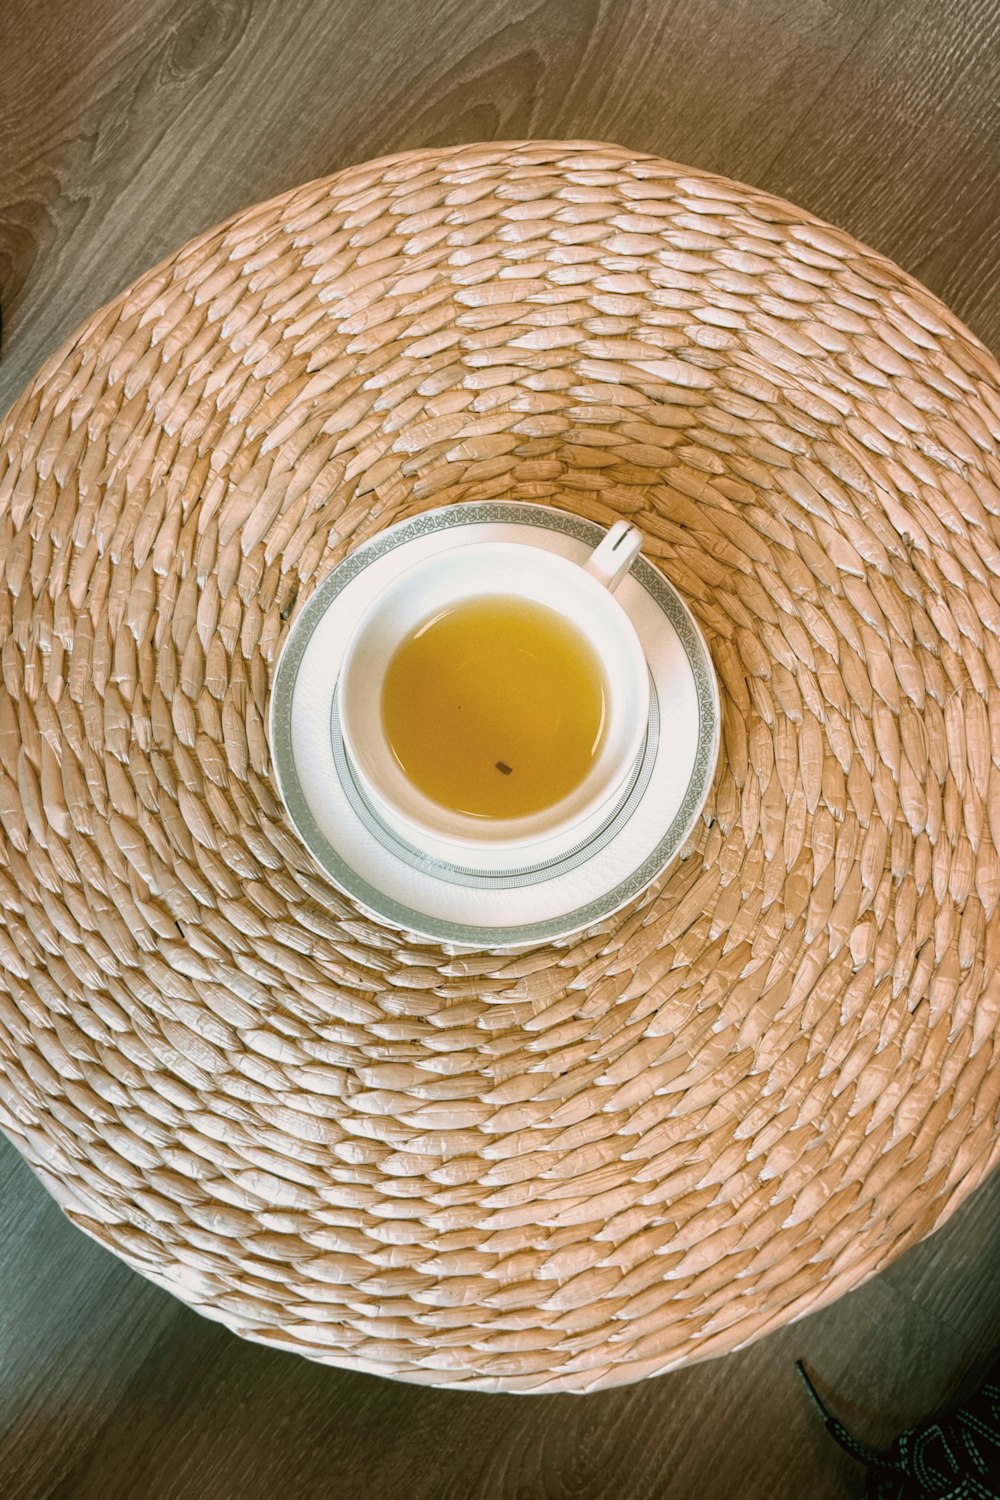 a cup of tea sitting on top of a straw hat